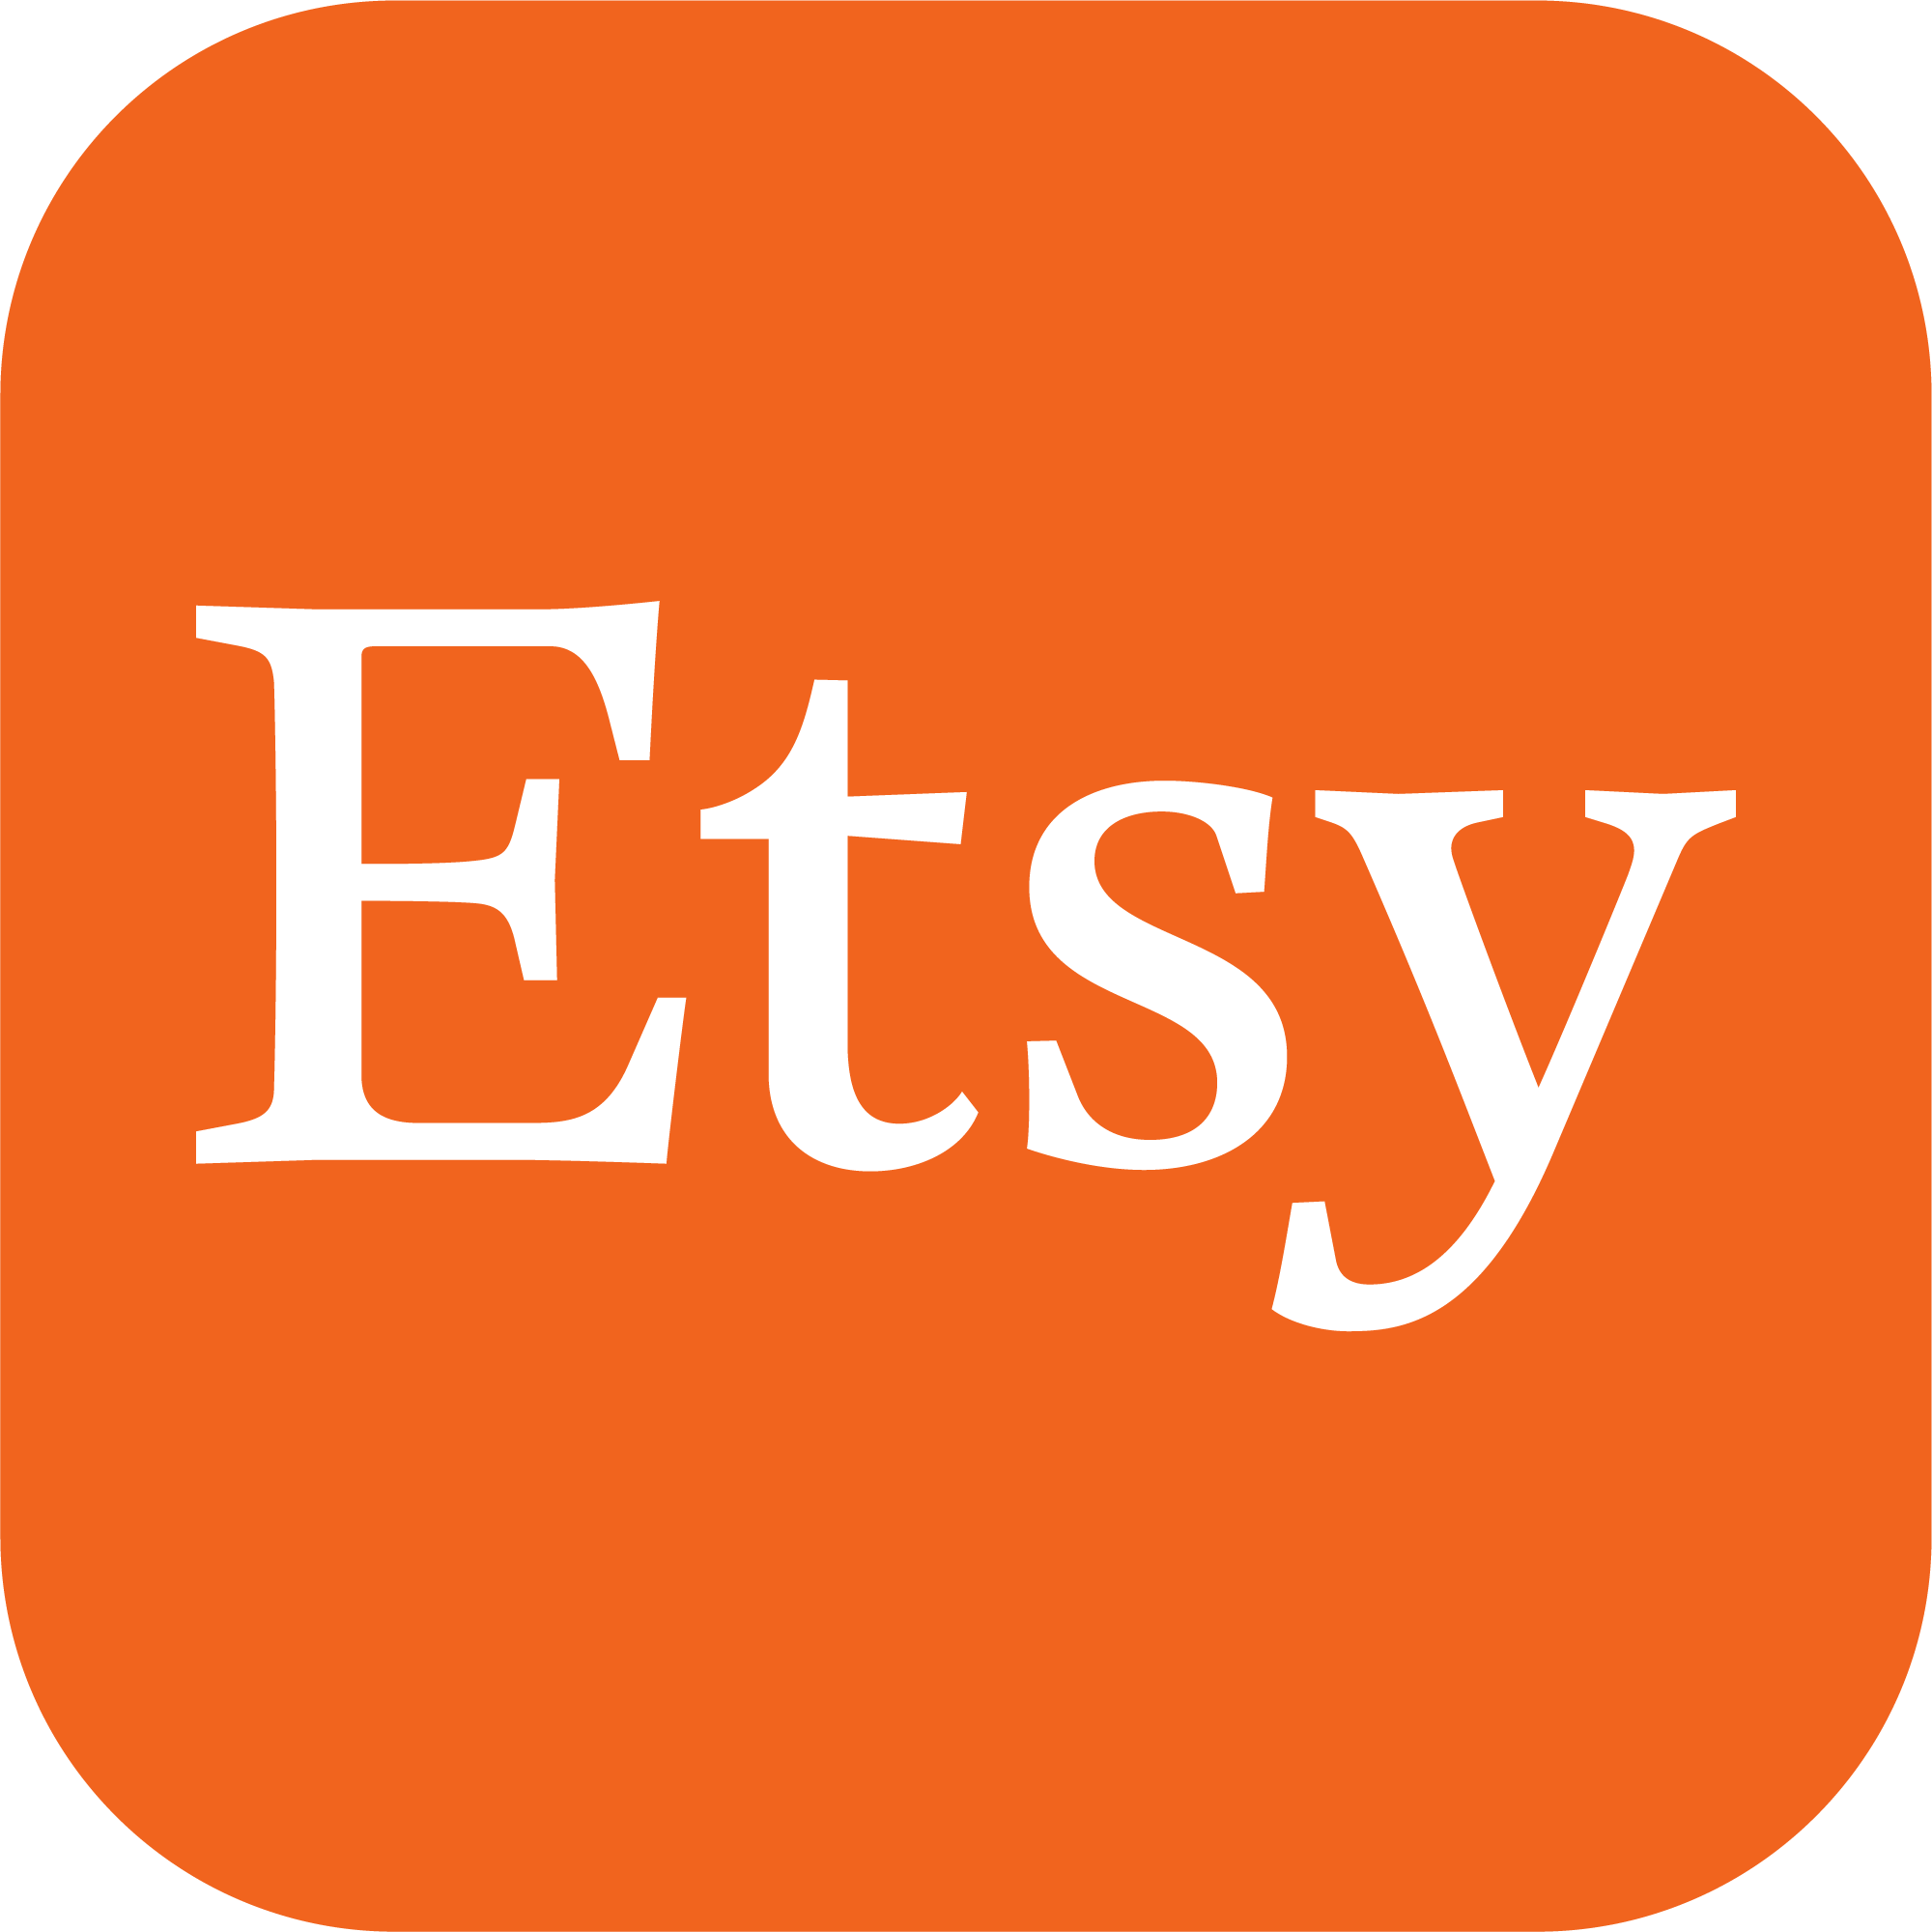 etsy icon png